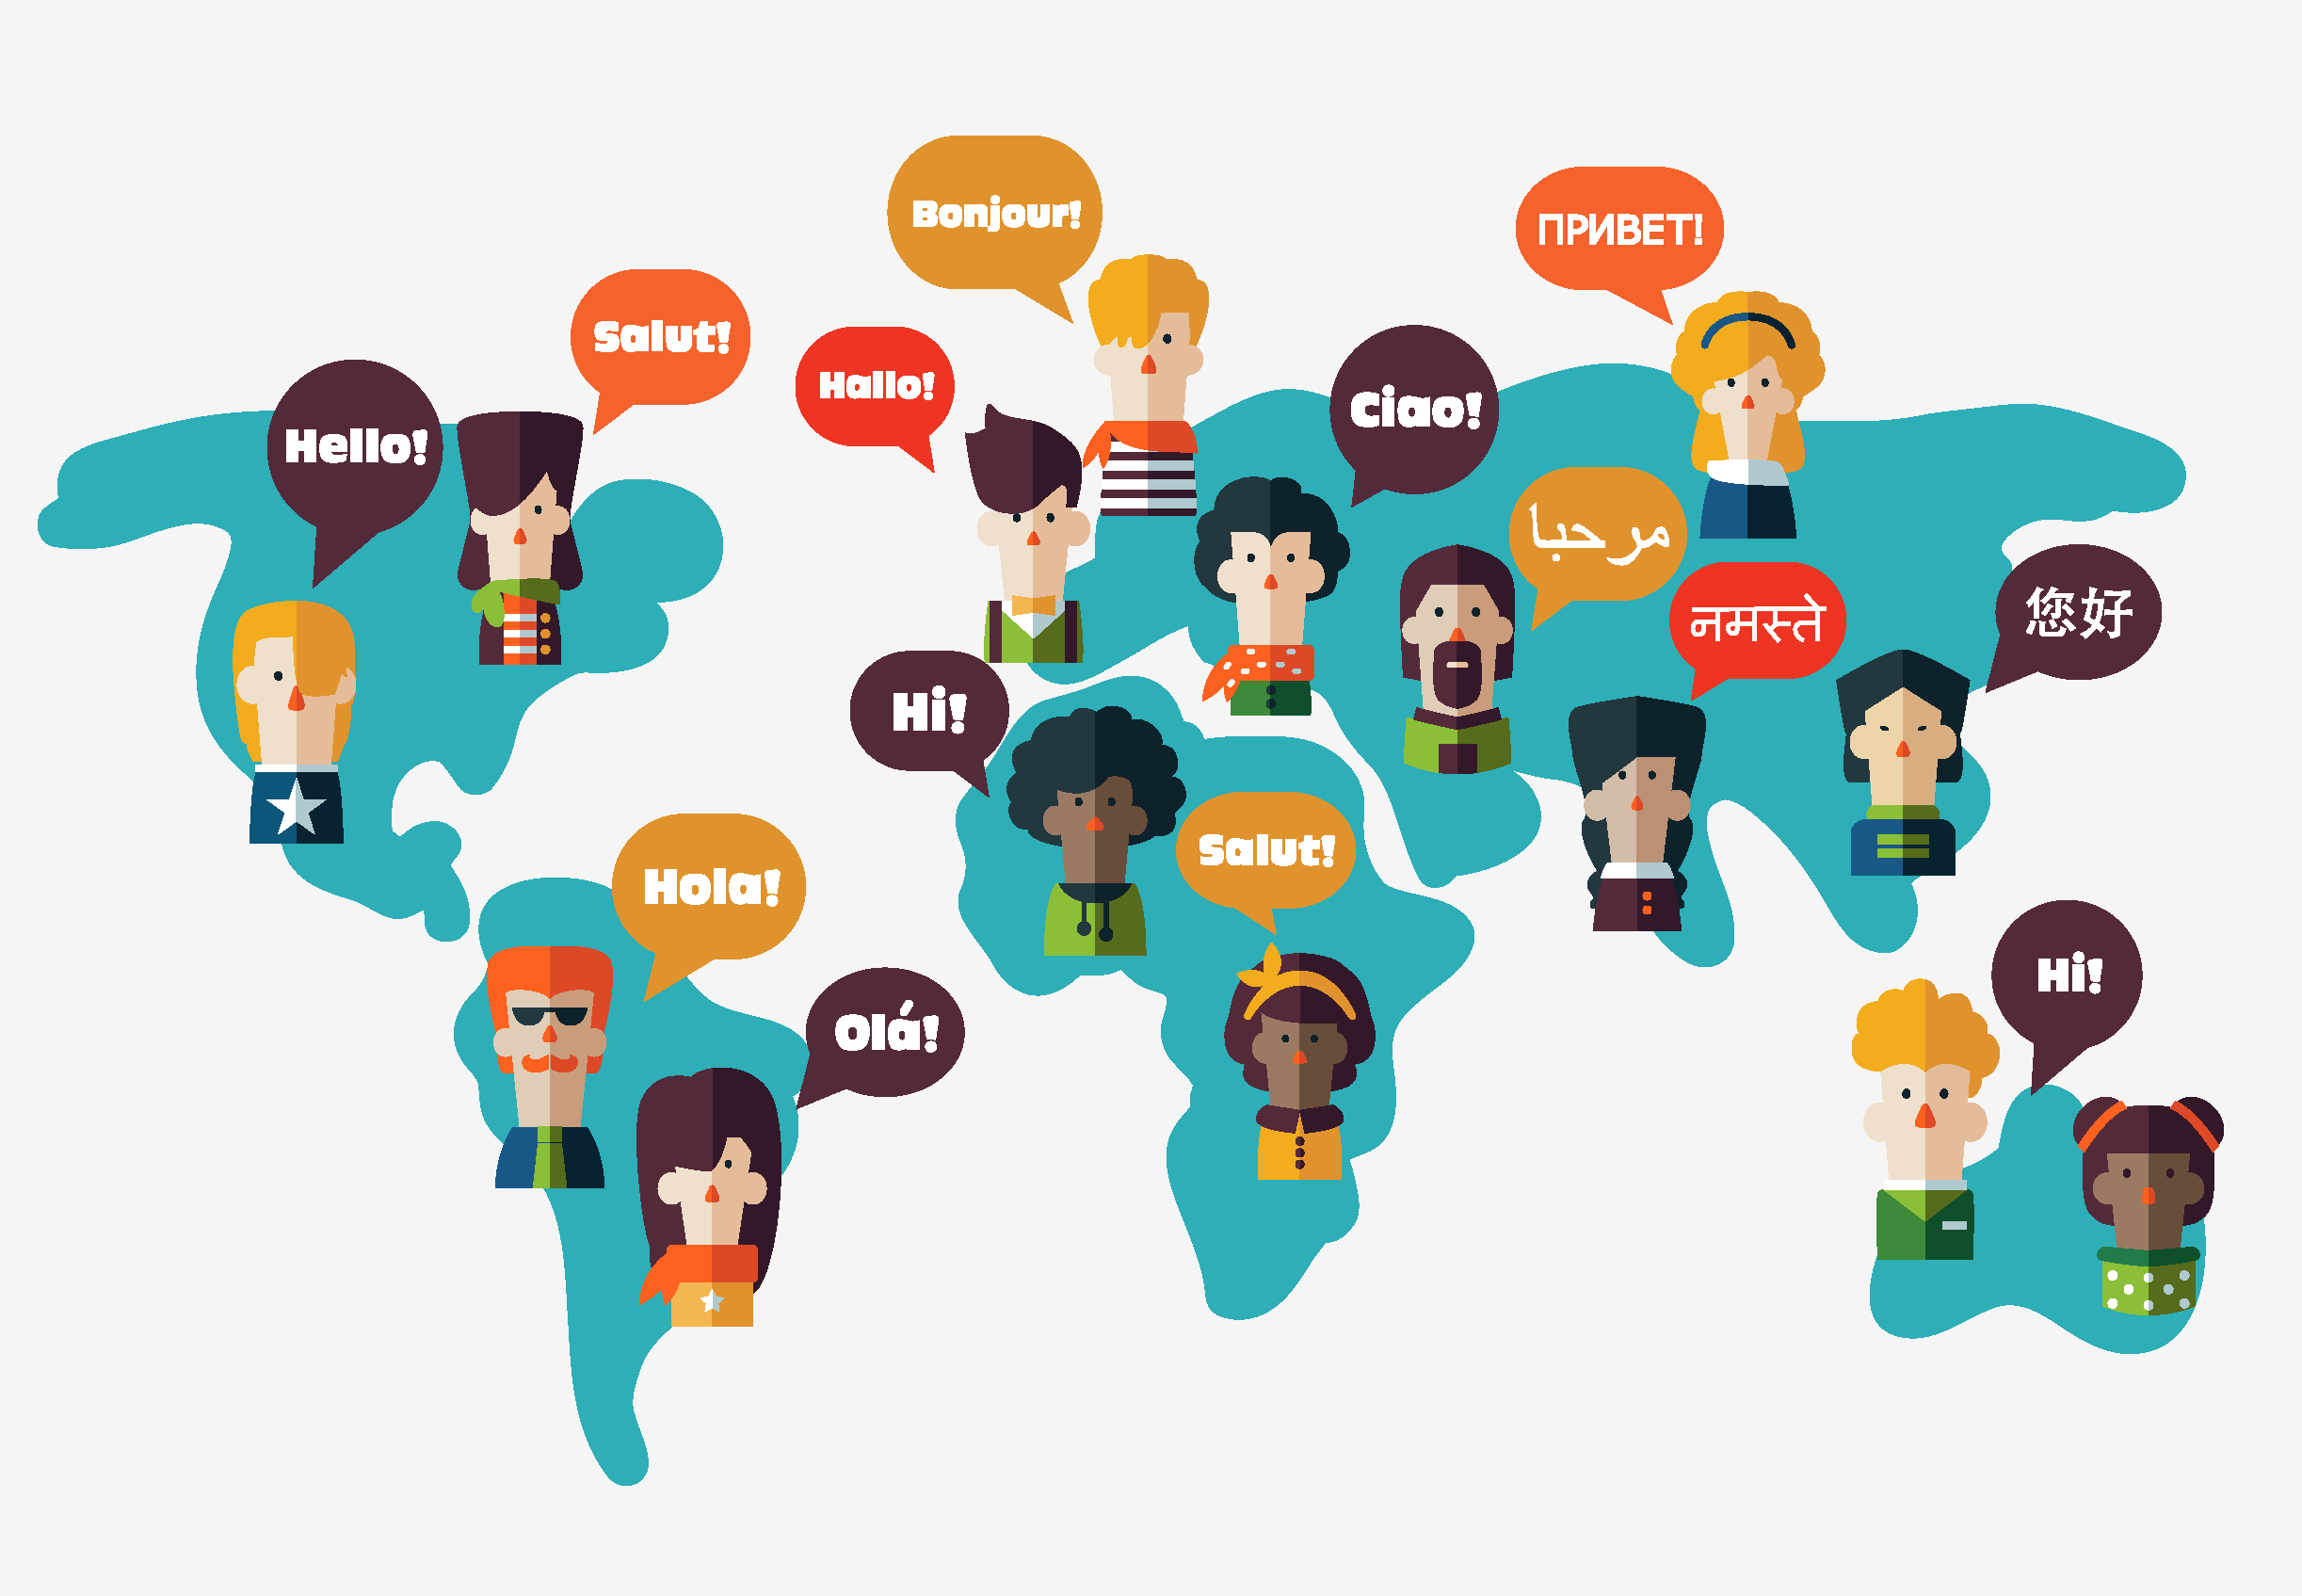 It is an image of the globe and it shows the different ways of saying hello in many languages.